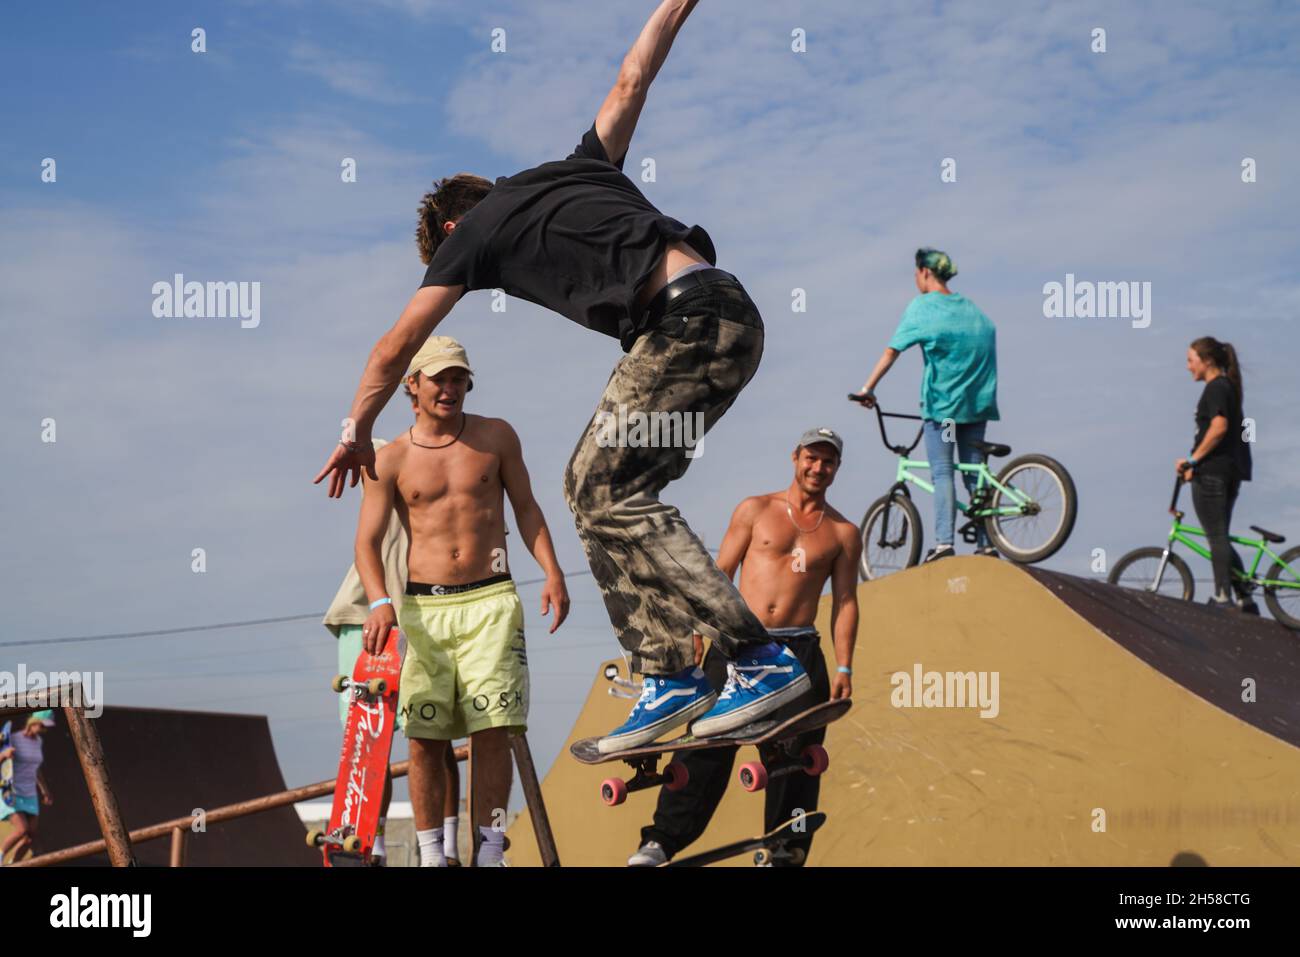 Olenevka, Russia - July 22, 2021: skateboarder jumping in a bowl of a skate park. High quality photo Stock Photo